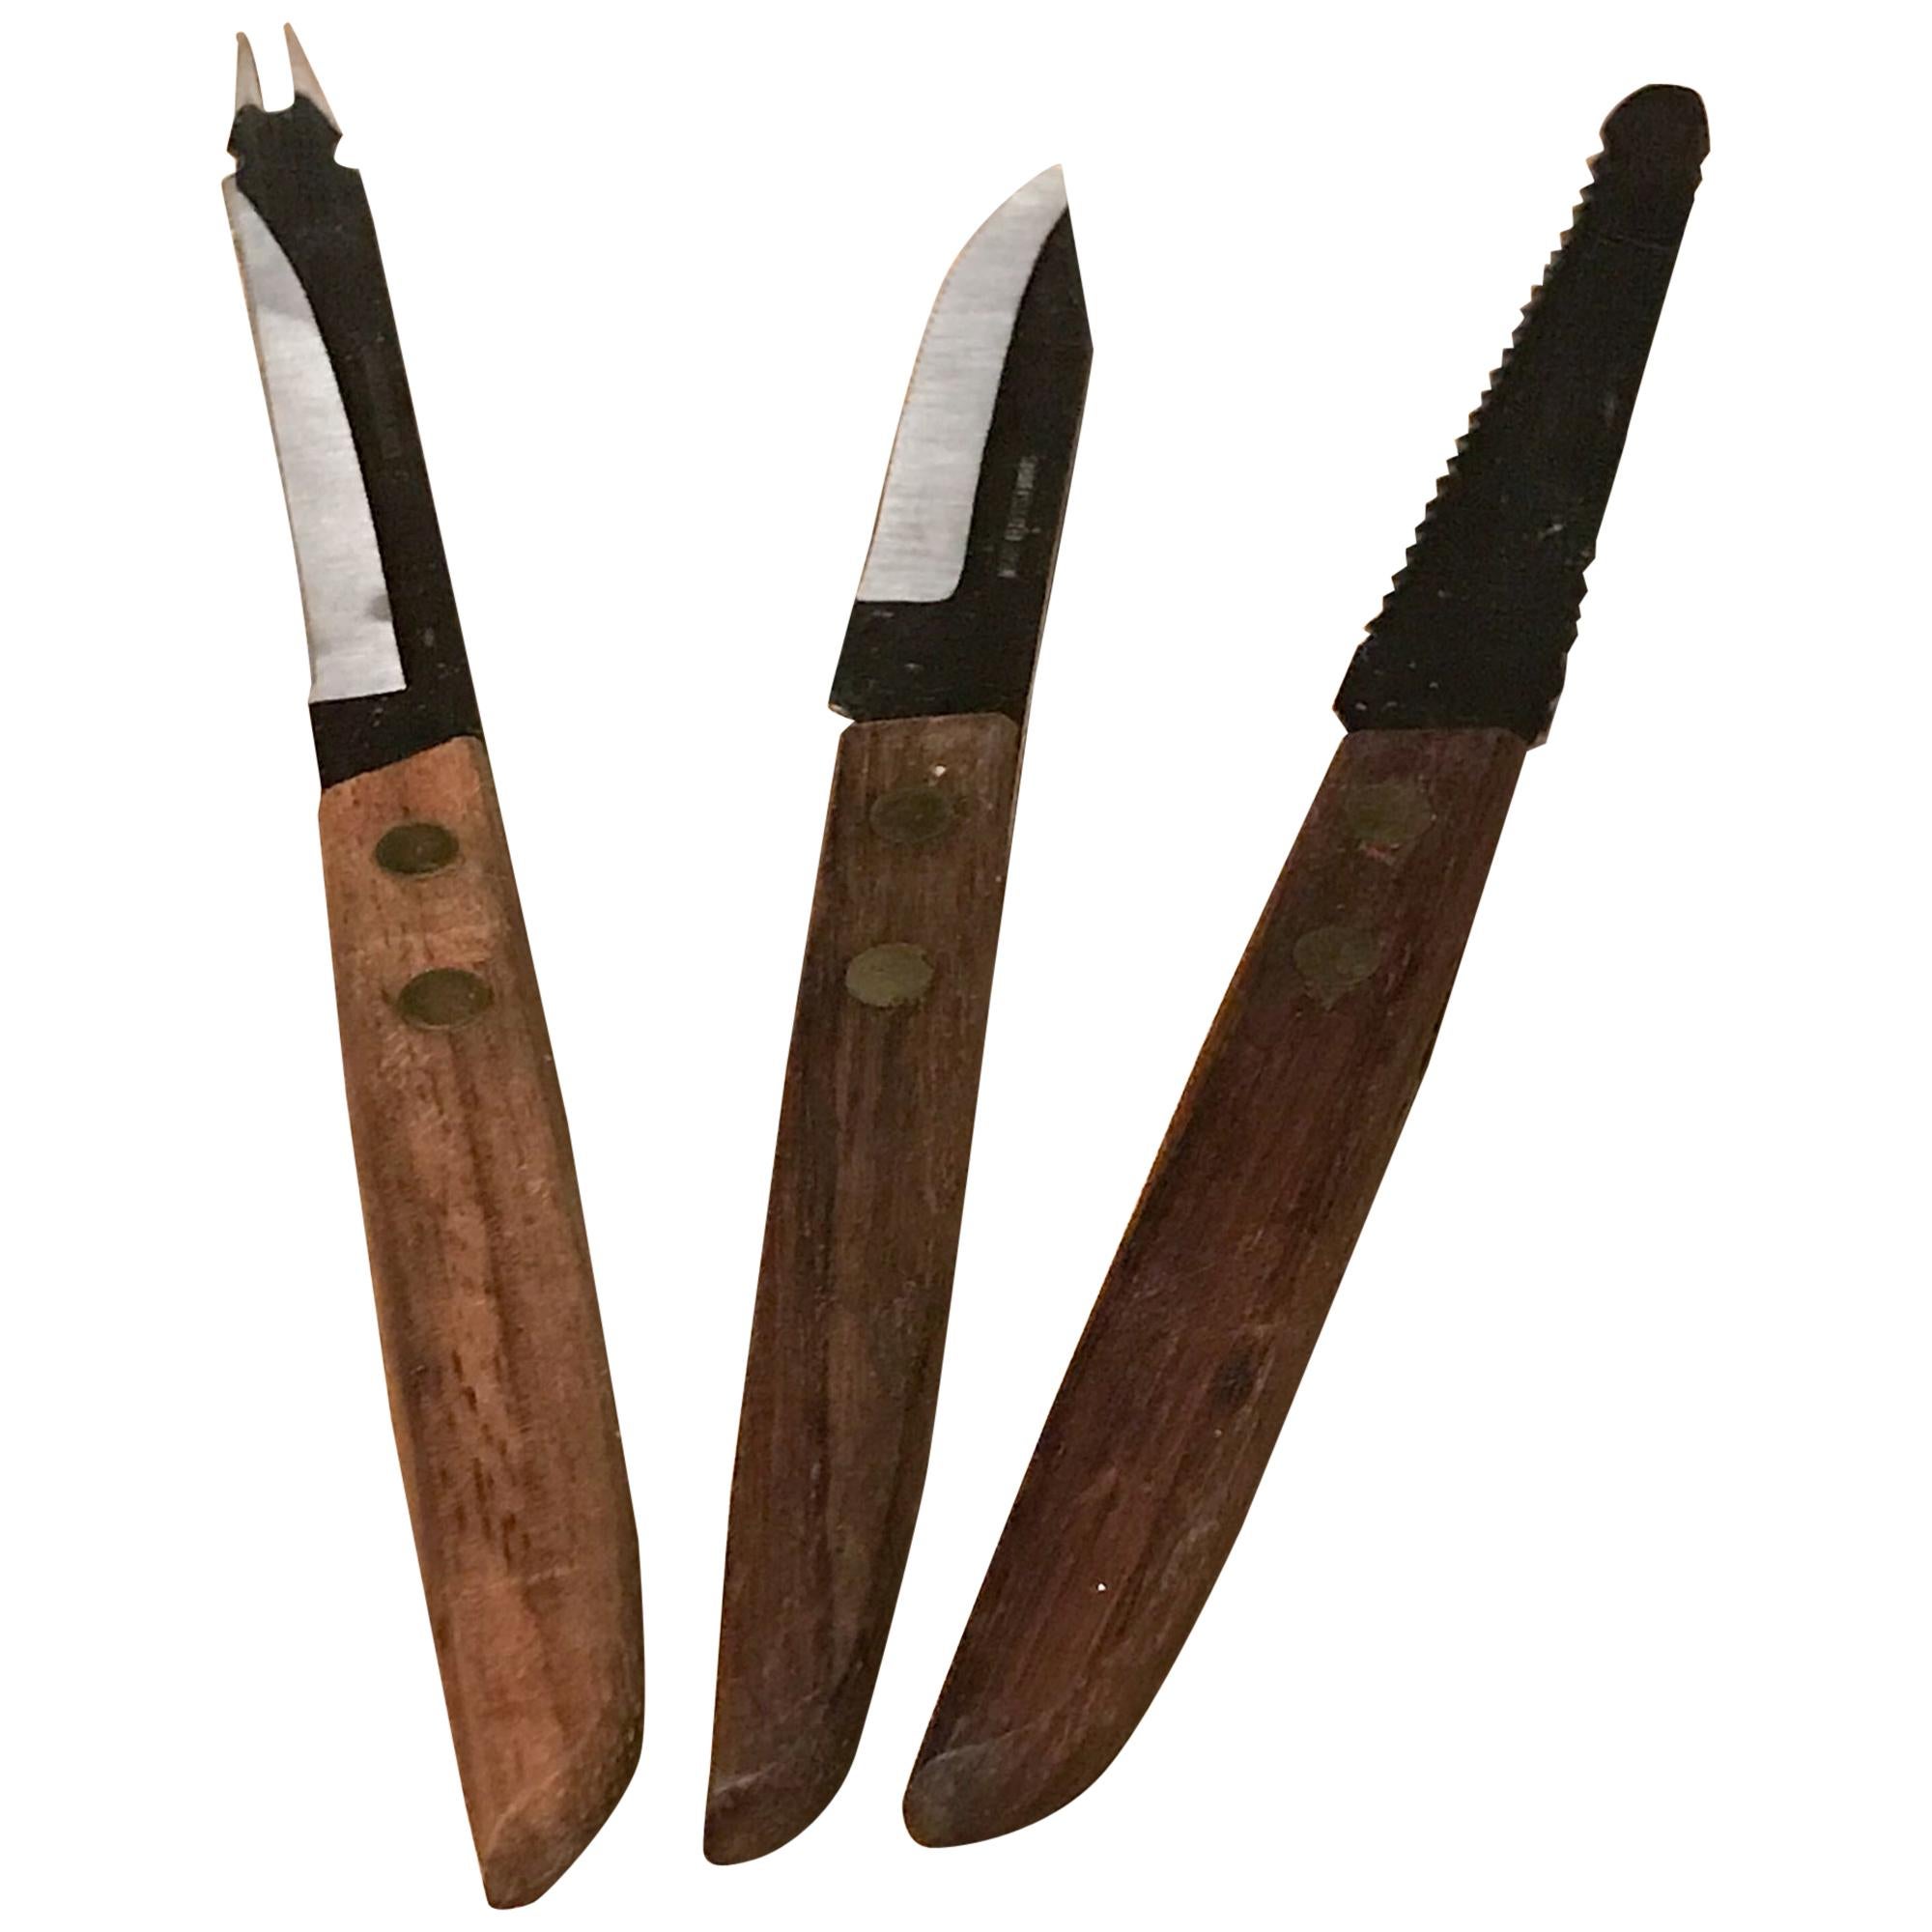 1960s Japanese Knife Set of three pieces
Rosewood & Stainless-Steel
Cheese prong tip bar knife, All-purpose double sided serrated and Paring utility knife
(1) 7.75L x .5 H, x .38 (2) 7 L, (3) 6.5
Stamped Japan
Original Unrestored Vintage Preowned